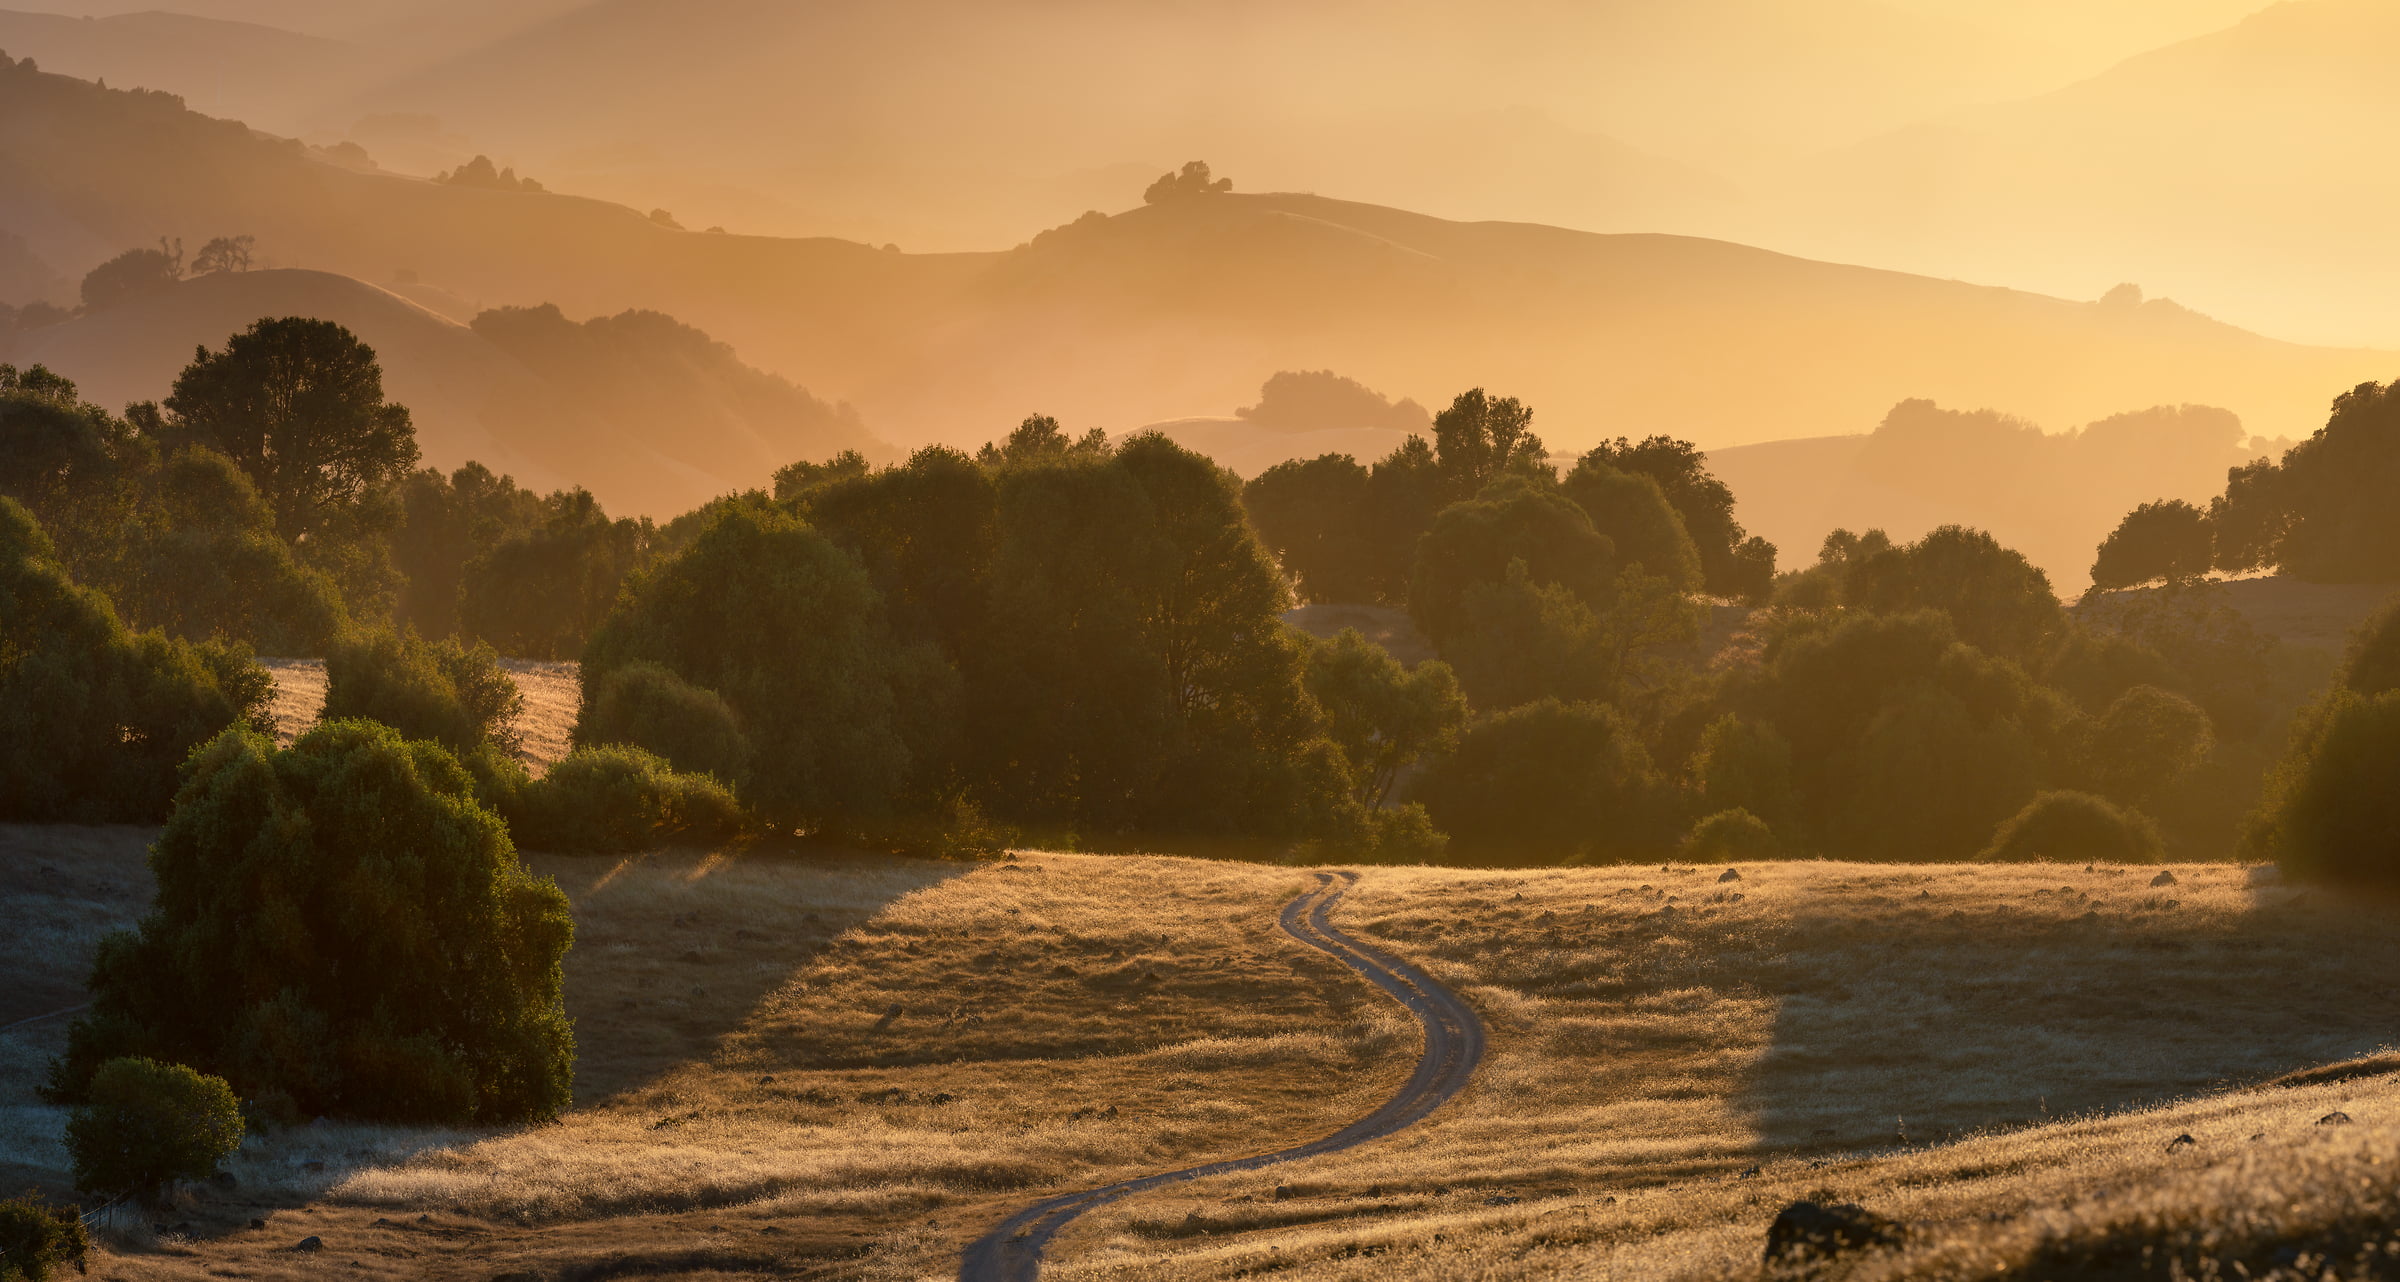 214 megapixels! A very high resolution, large-format VAST photo print of a golden sunset landscape with trees, hills, and a dirt road; landscape photograph created by Jeff Lewis in Marin County, California